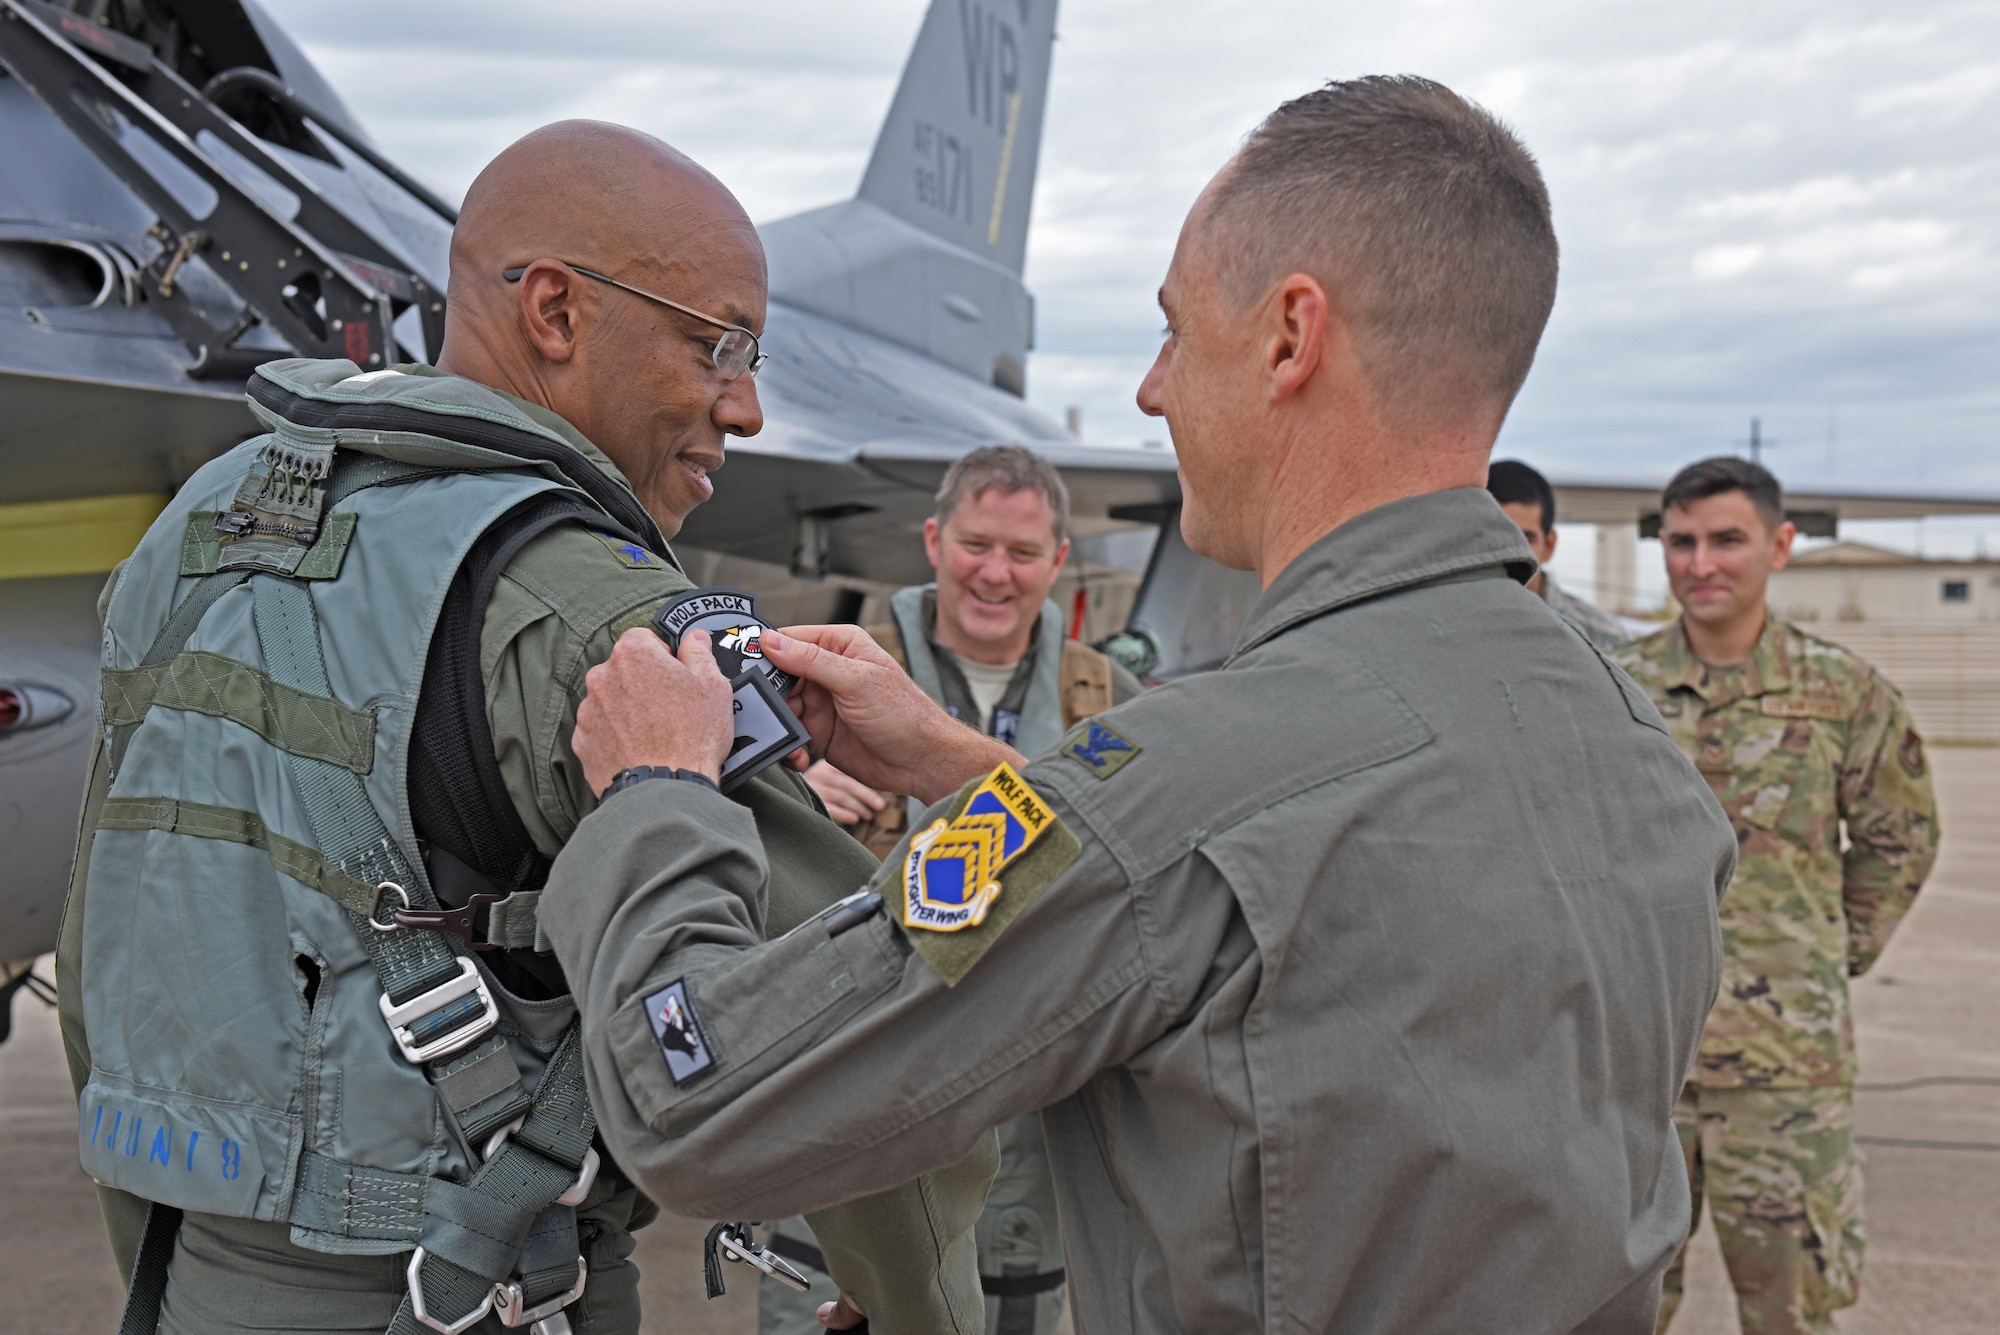 U.S. Air Force Gen. CQ Brown, Jr. Pacific Air Forces commander, receives a Wolf Pack patch from Col. Tad Clark, 8th Fighter Wing commander, during a visit at Kunsan Air Base, Republic of Korea, Oct. 18, 2019. Brown was stationed at Kunsan from April 1987 to October 1988 as a first lieutenant and then again from May 2007 to May 2008, where he led the Wolf Pack as “Wolf 46.” (U.S. Air Force photo by Staff Sgt. Mackenzie Mendez)